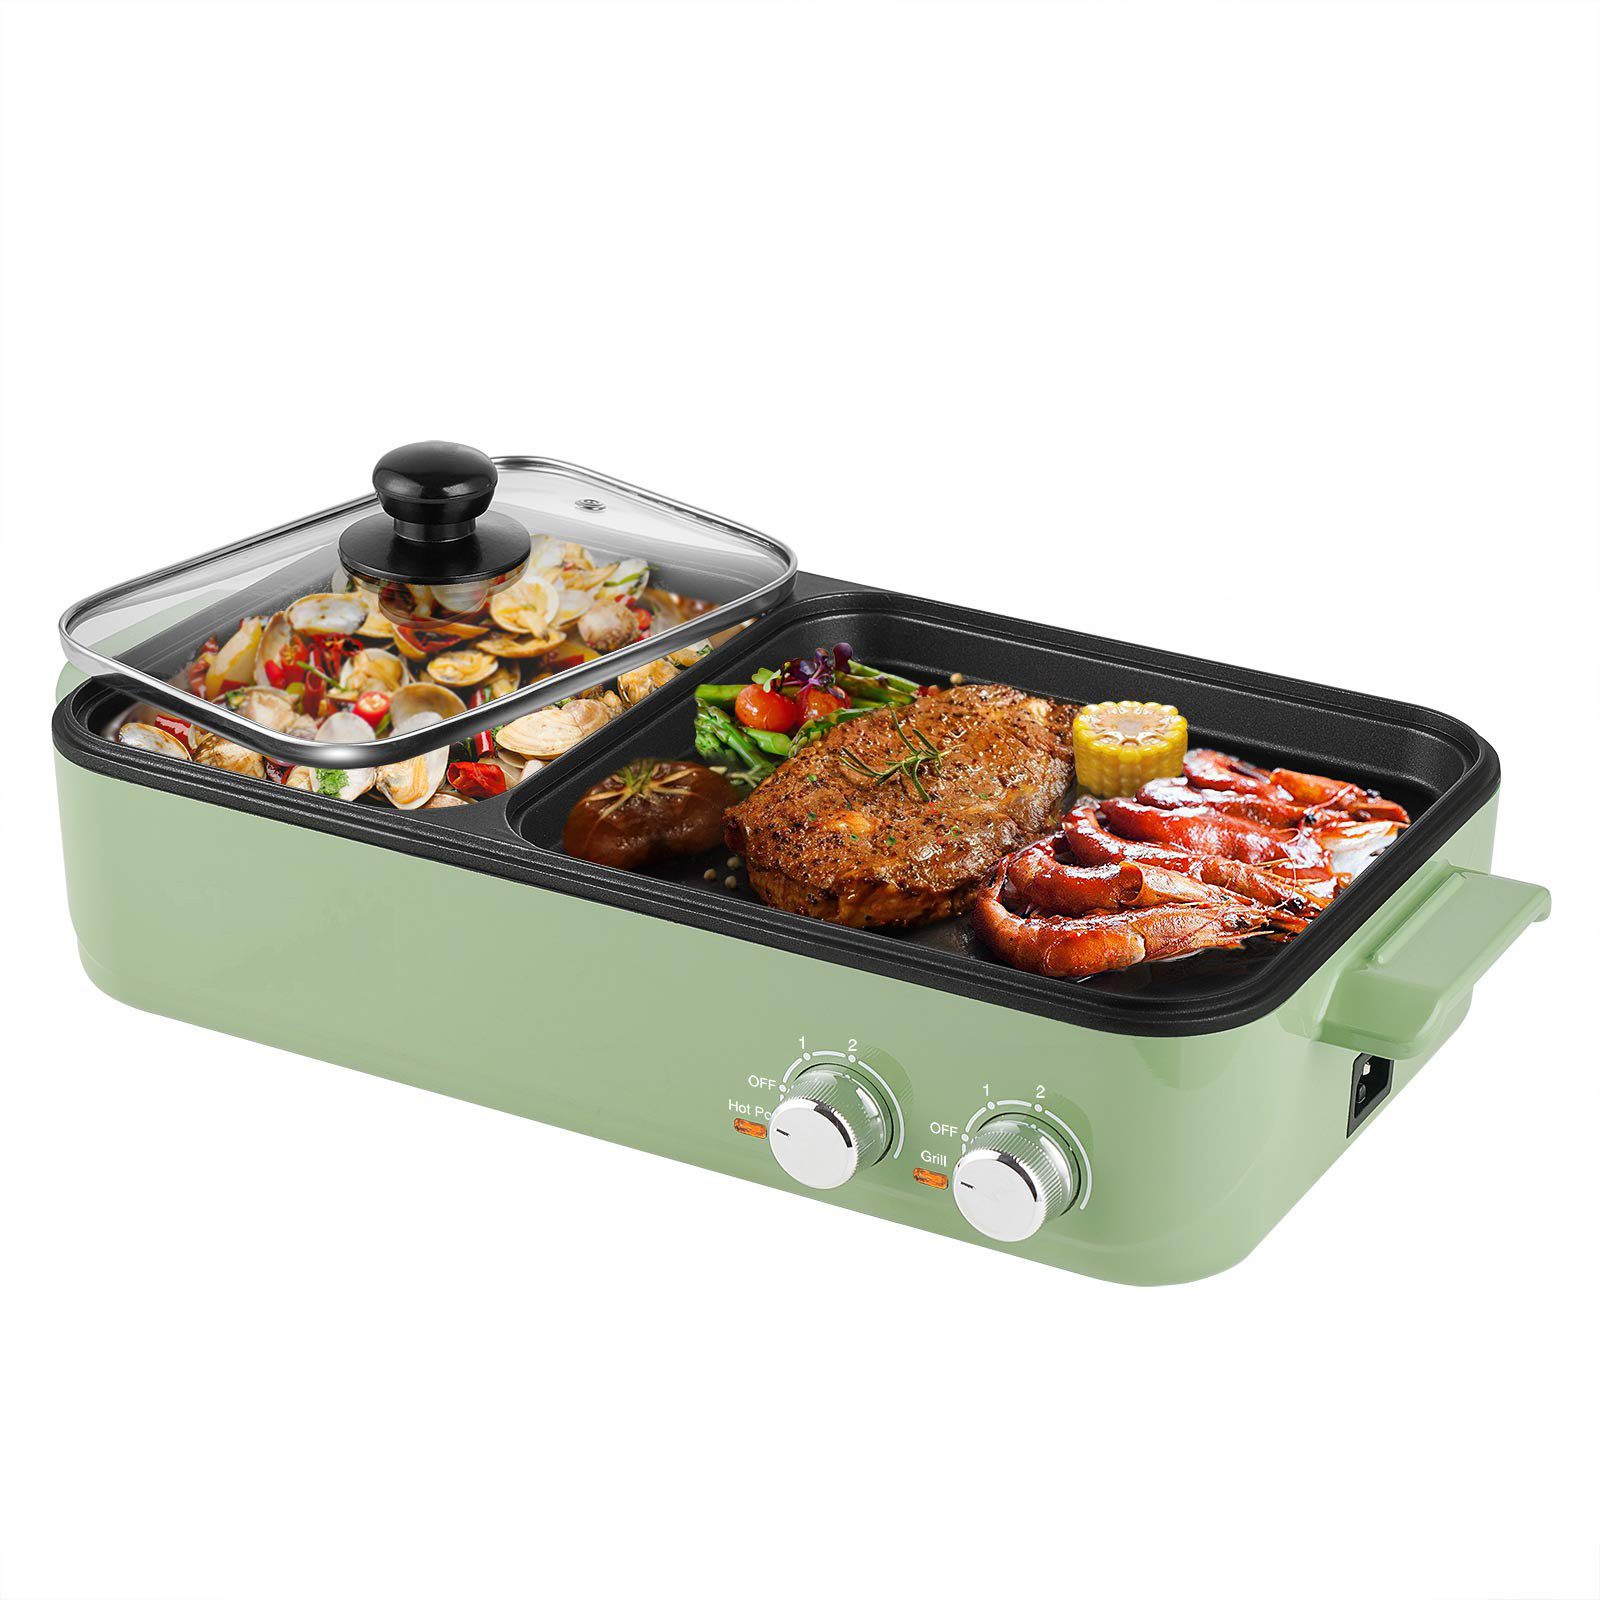 2 in 1 Indoor Non-Stick Electric Hot Pot and Griddle